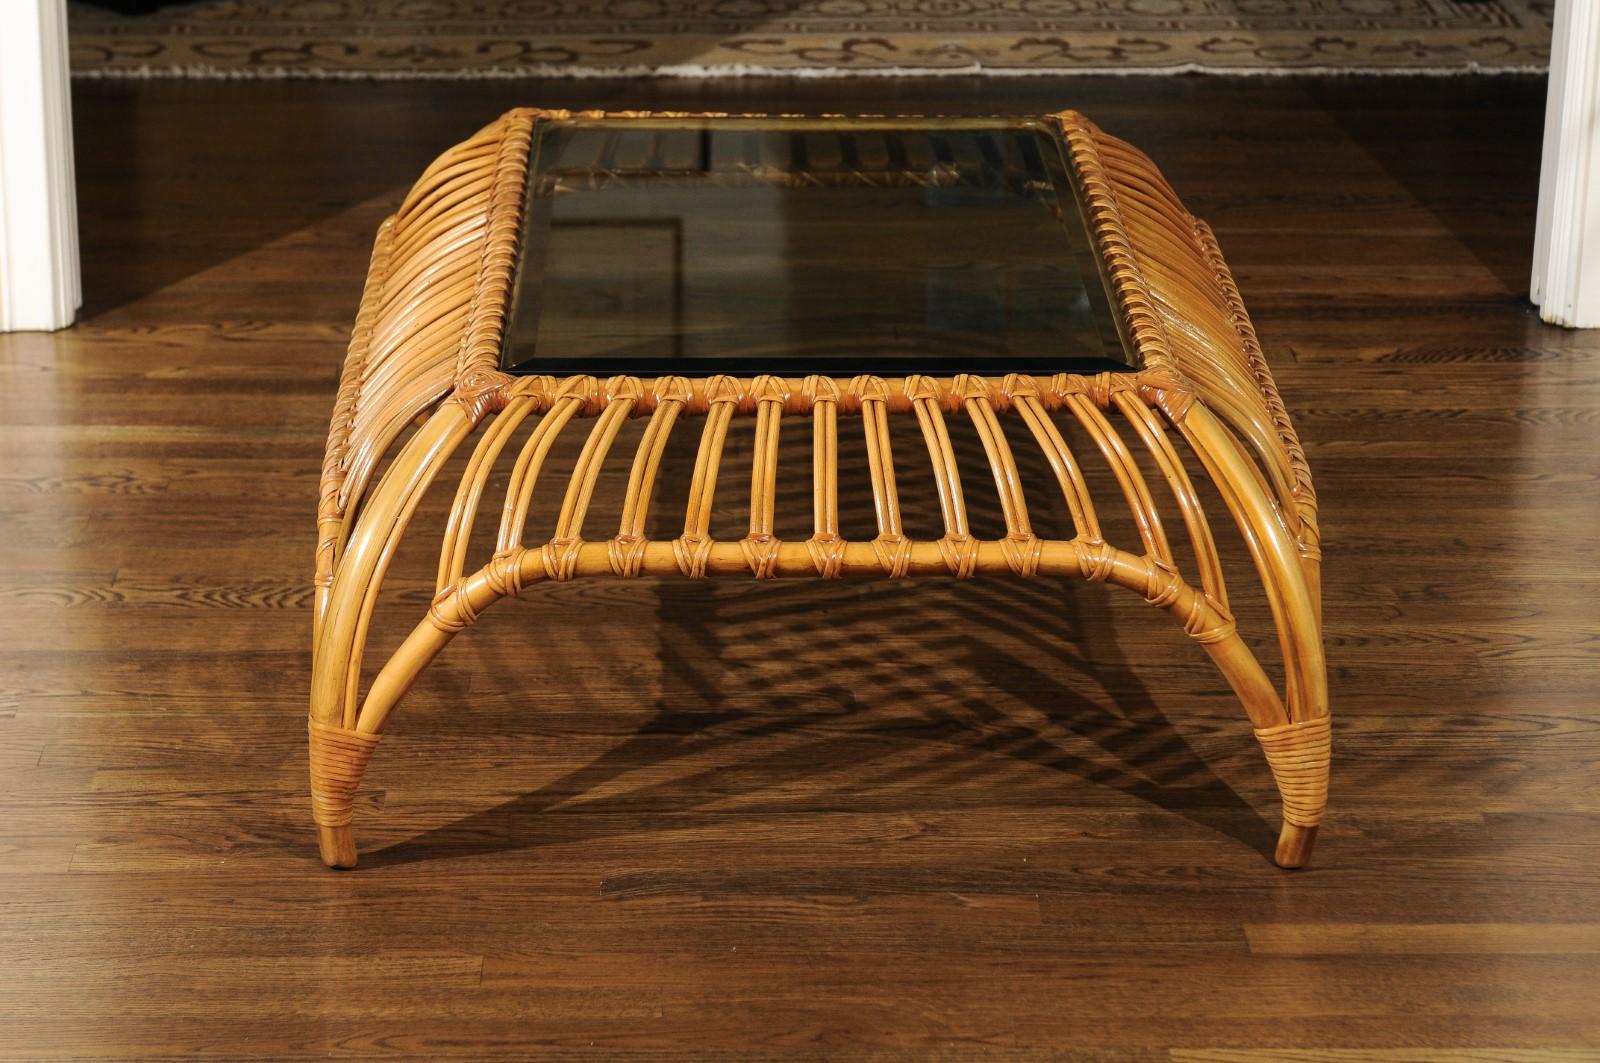 An exquisite and unique coffee table by the esteemed Henry Olko for his Willow and Reed firm, circa 1979. Mr. Olko, himself, has confirmed that this special low production piece is his work. This rare example is from his boutique Tiara series. Stout